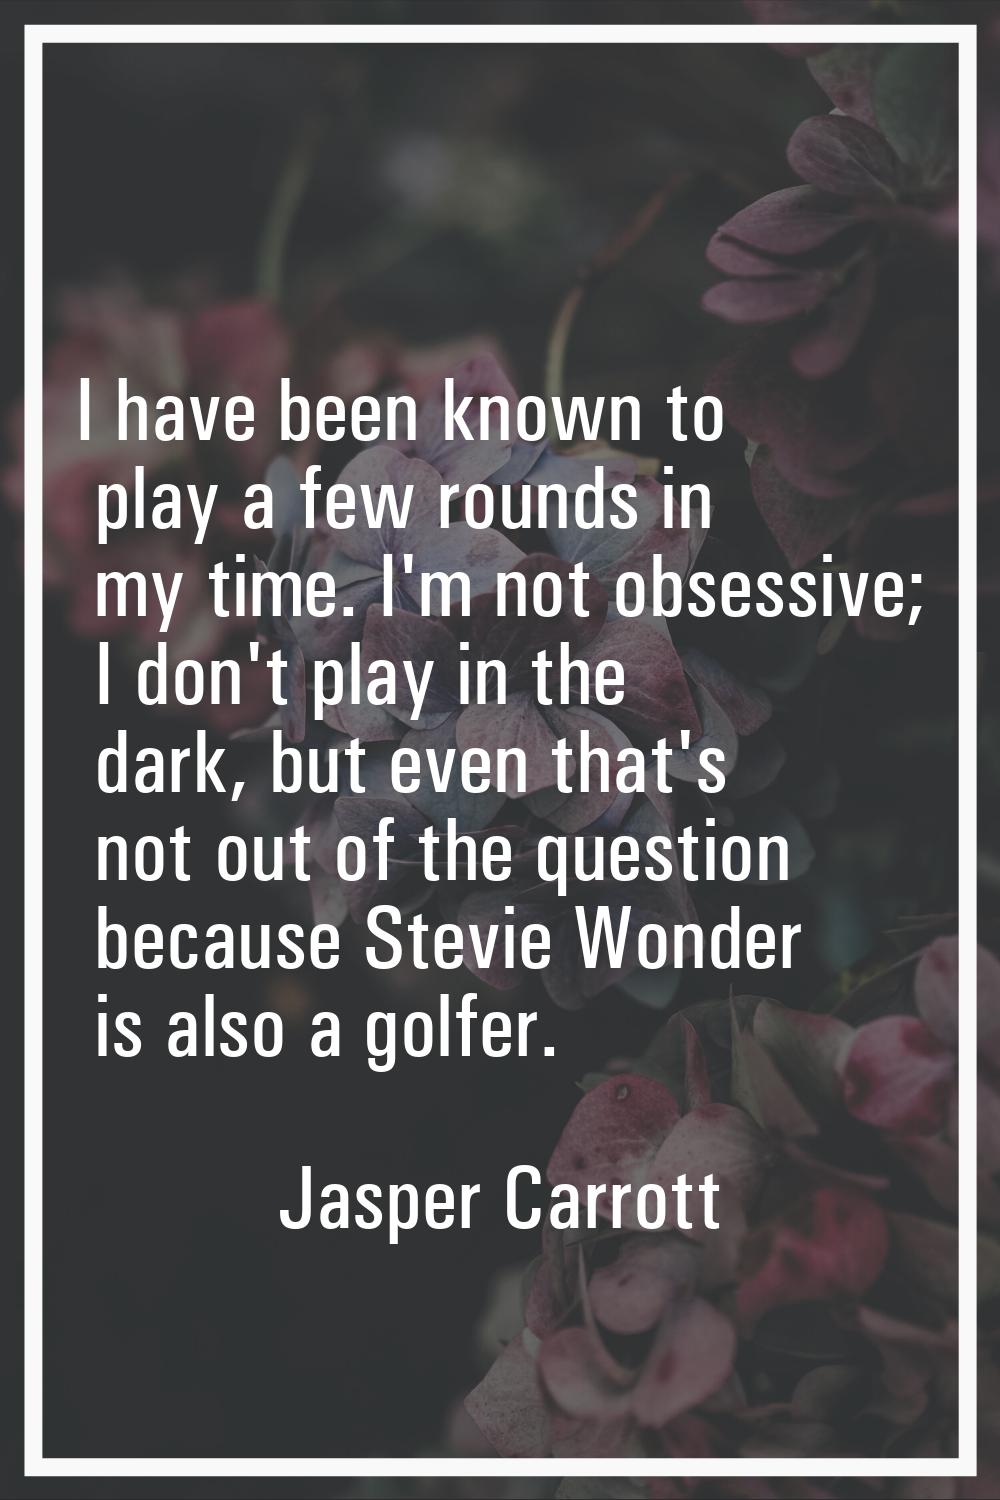 I have been known to play a few rounds in my time. I'm not obsessive; I don't play in the dark, but